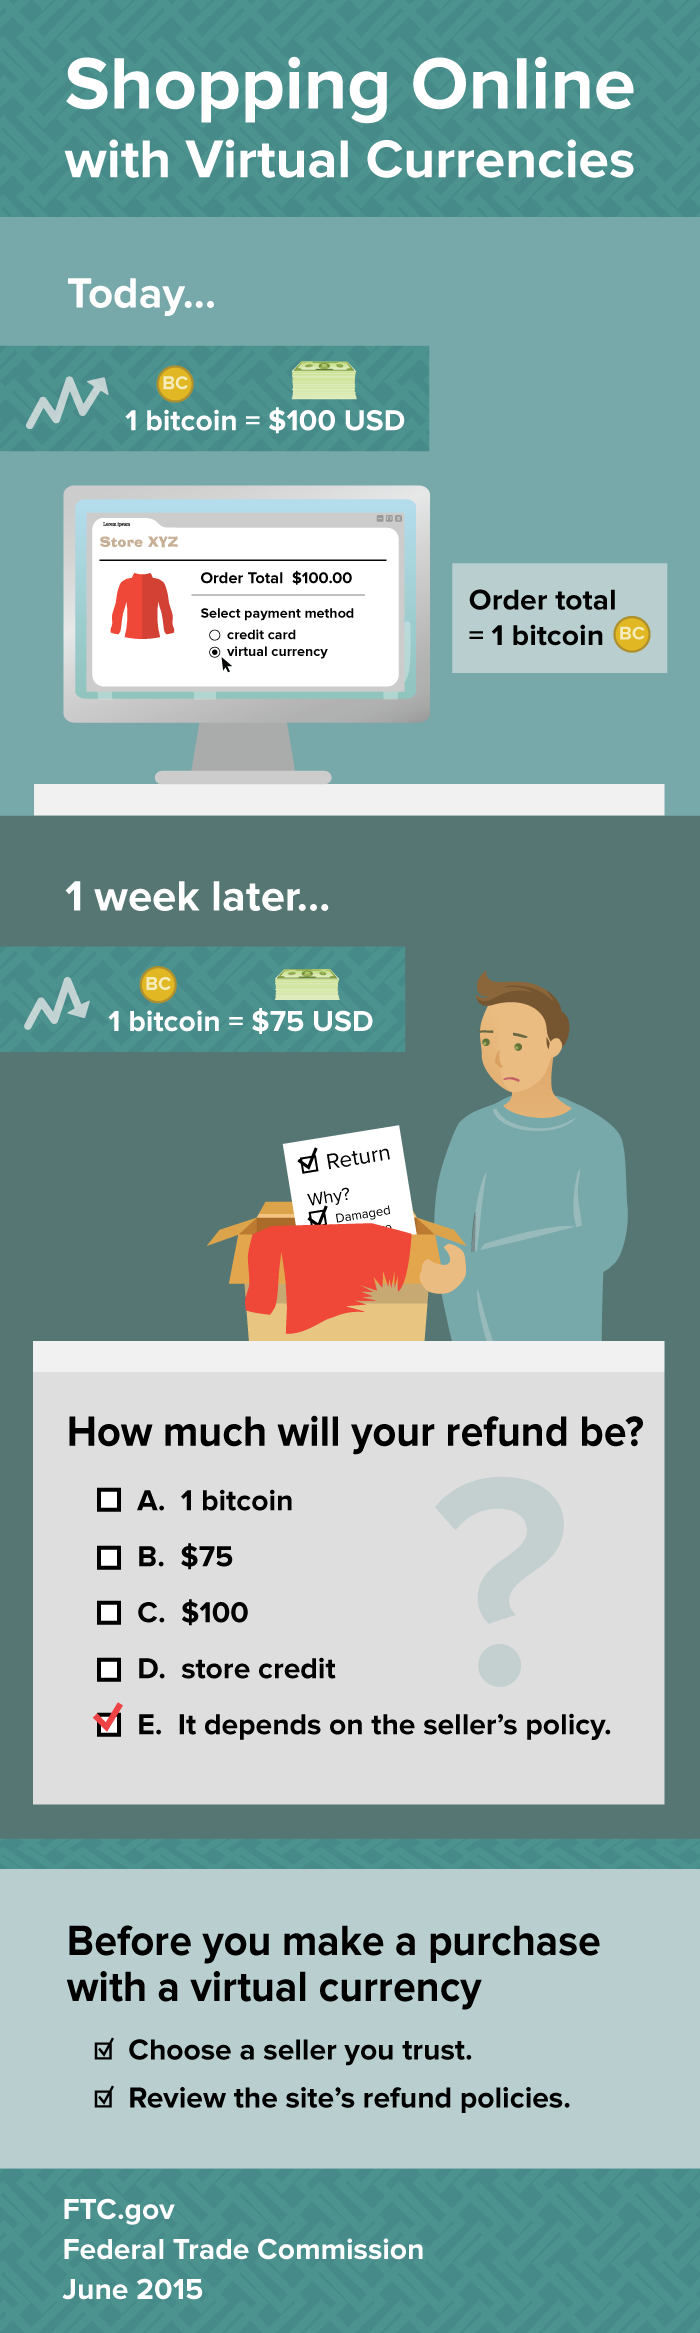 Shopping Online with Virtual Currencies. Before you make a purchase with a virtual currency, choose a seller you trust and review the site’s refund policies. Here’s an example to illustrate why. Say you buy a sweater today that cost $100. You decide to pay in bitcoins. Today, 1 bitcoin is worth $100. When you get the sweater, one week later, it’s damaged. Now 1 bitcoin is worth $75. How much will your refund be? A. 1 bitcoin B. $75 C. $100 D. store credit E. It depends on the seller’s policy. The answer is E. It depends on the seller’s policy.